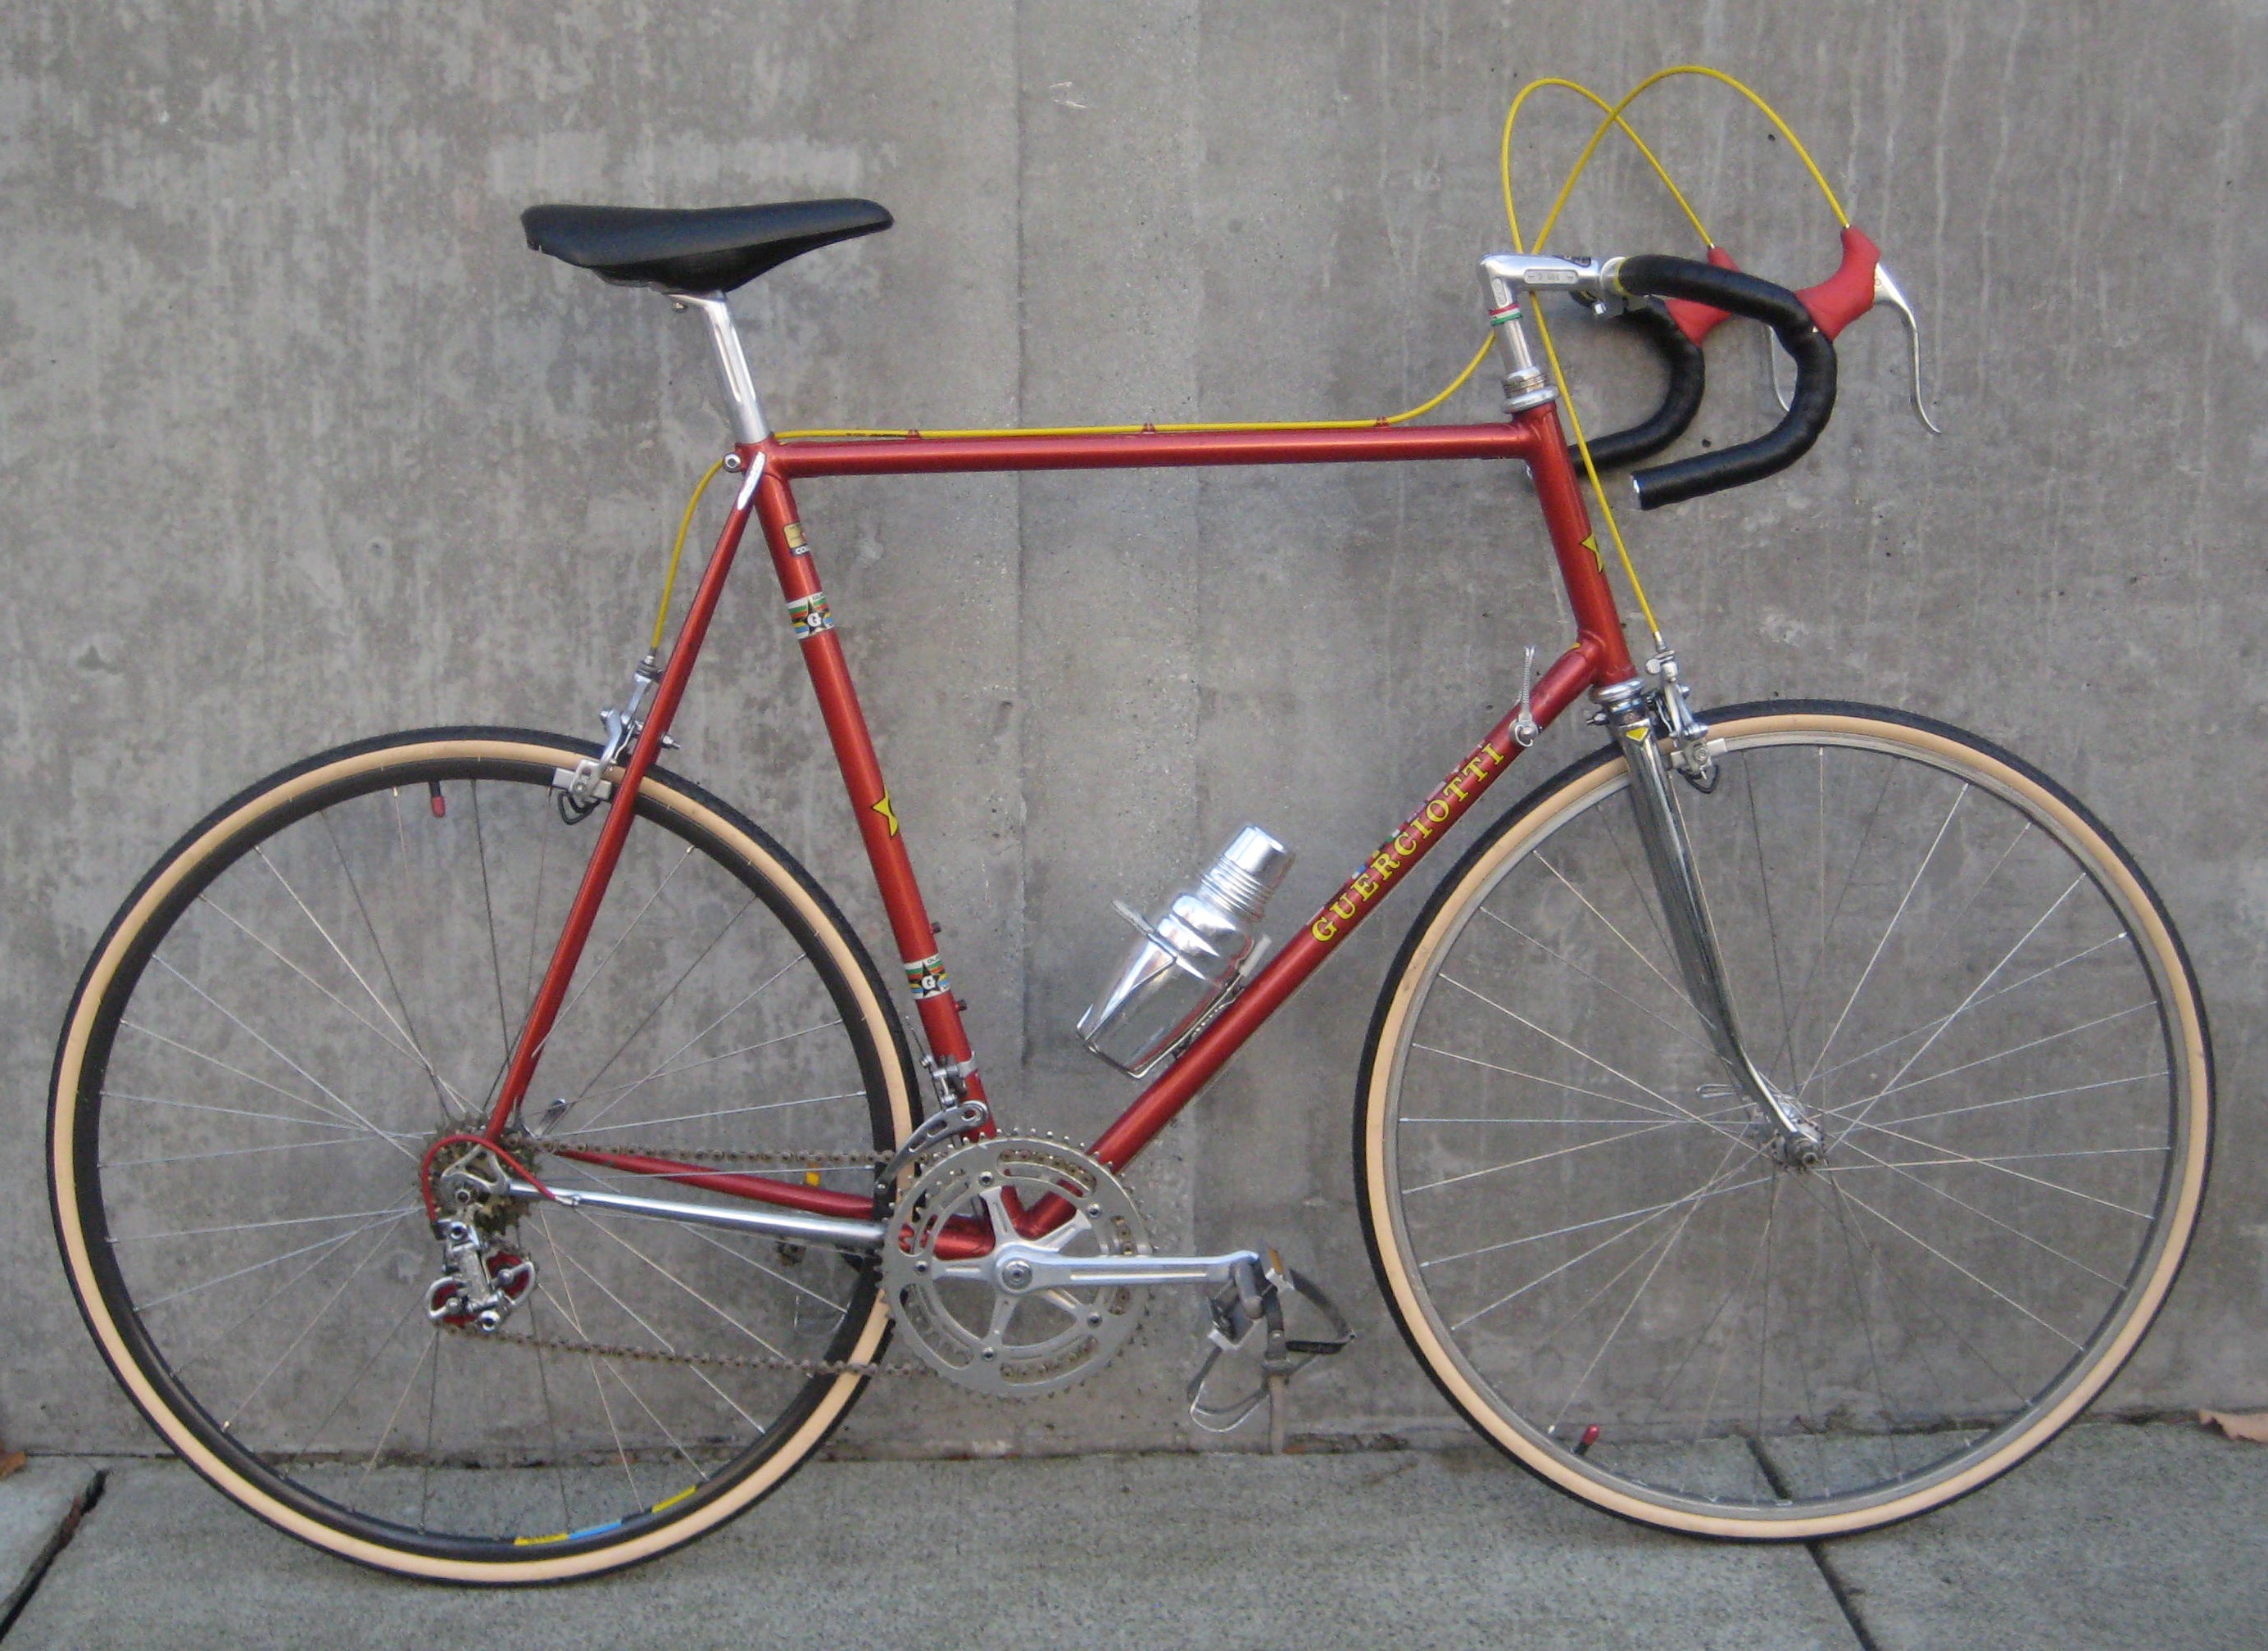 Used Vintage bikes for sale at Classic Cycle Classic Cycle Bainbridge Island Kitsap County